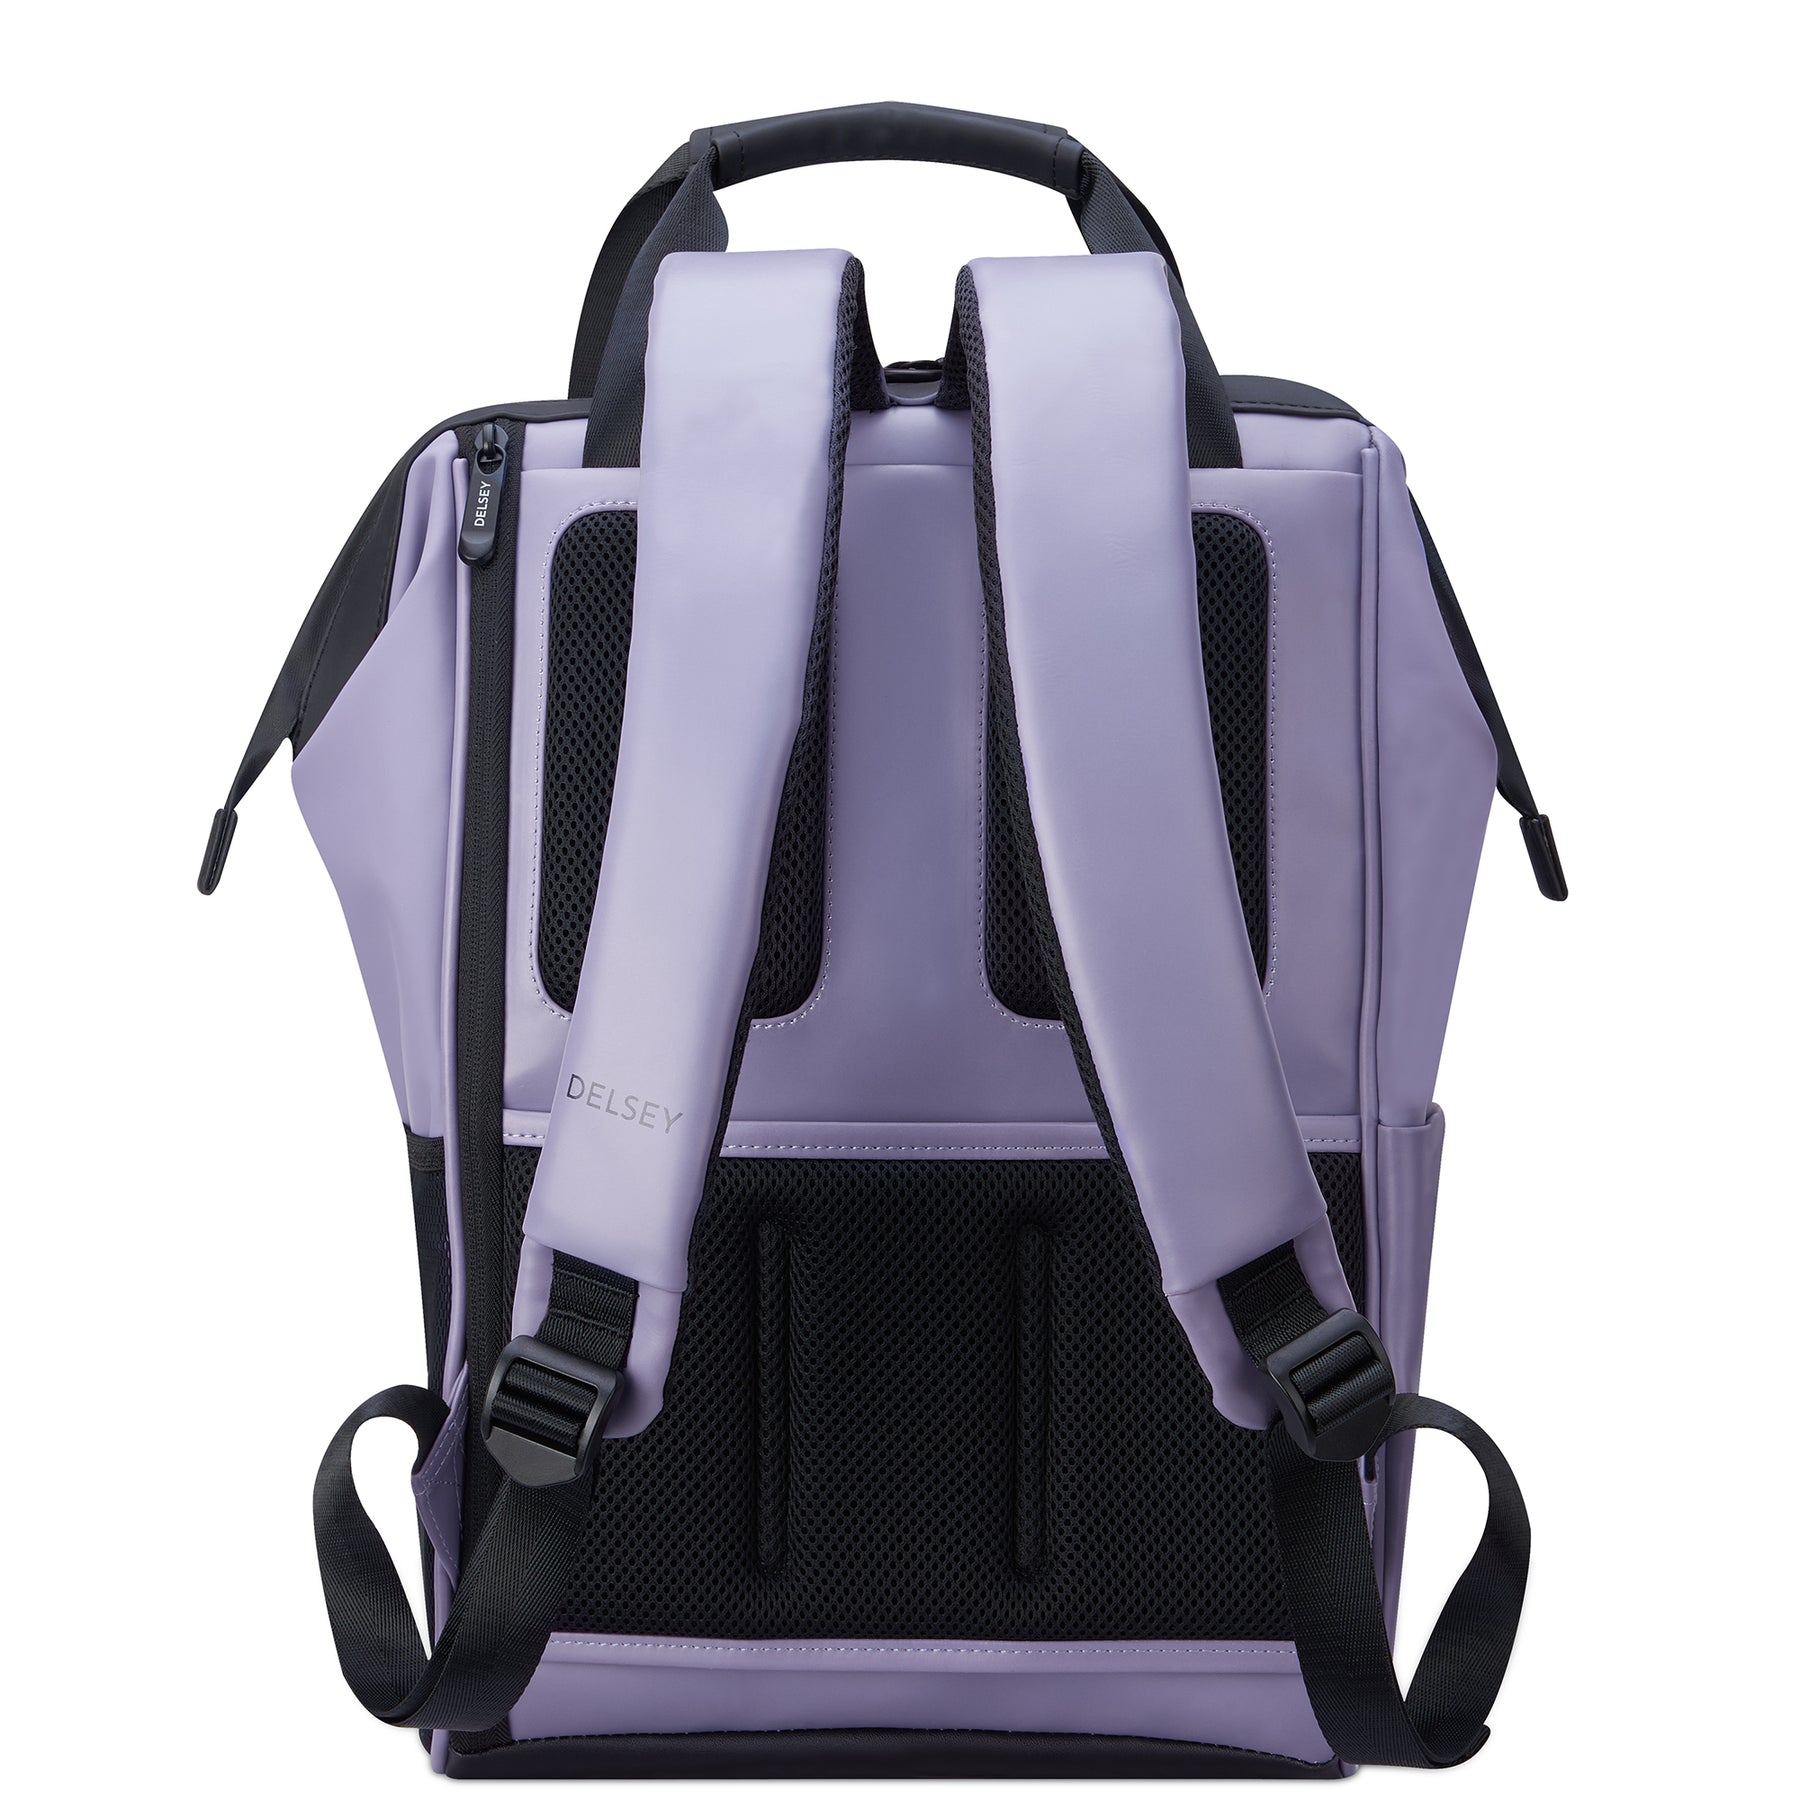 TURENNE - BackPack (PC Protection 14) – DELSEY PARIS INT